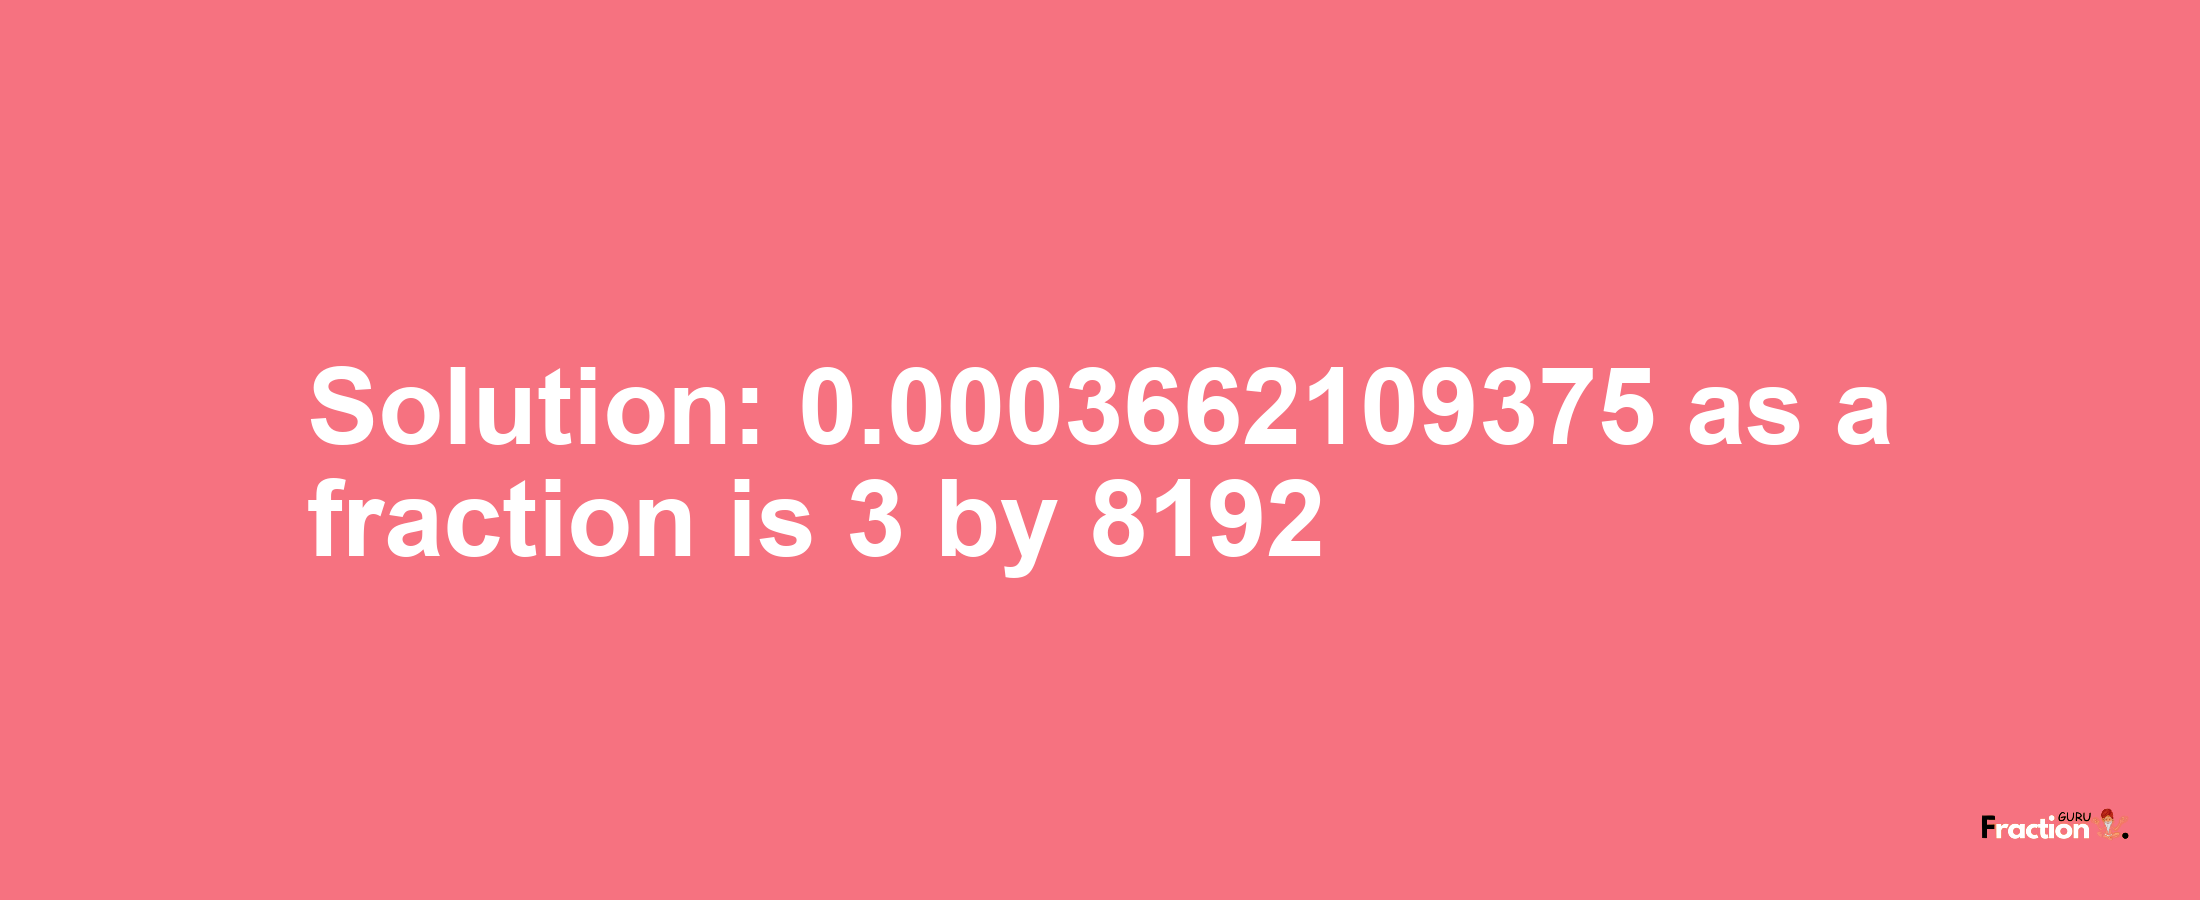 Solution:0.0003662109375 as a fraction is 3/8192